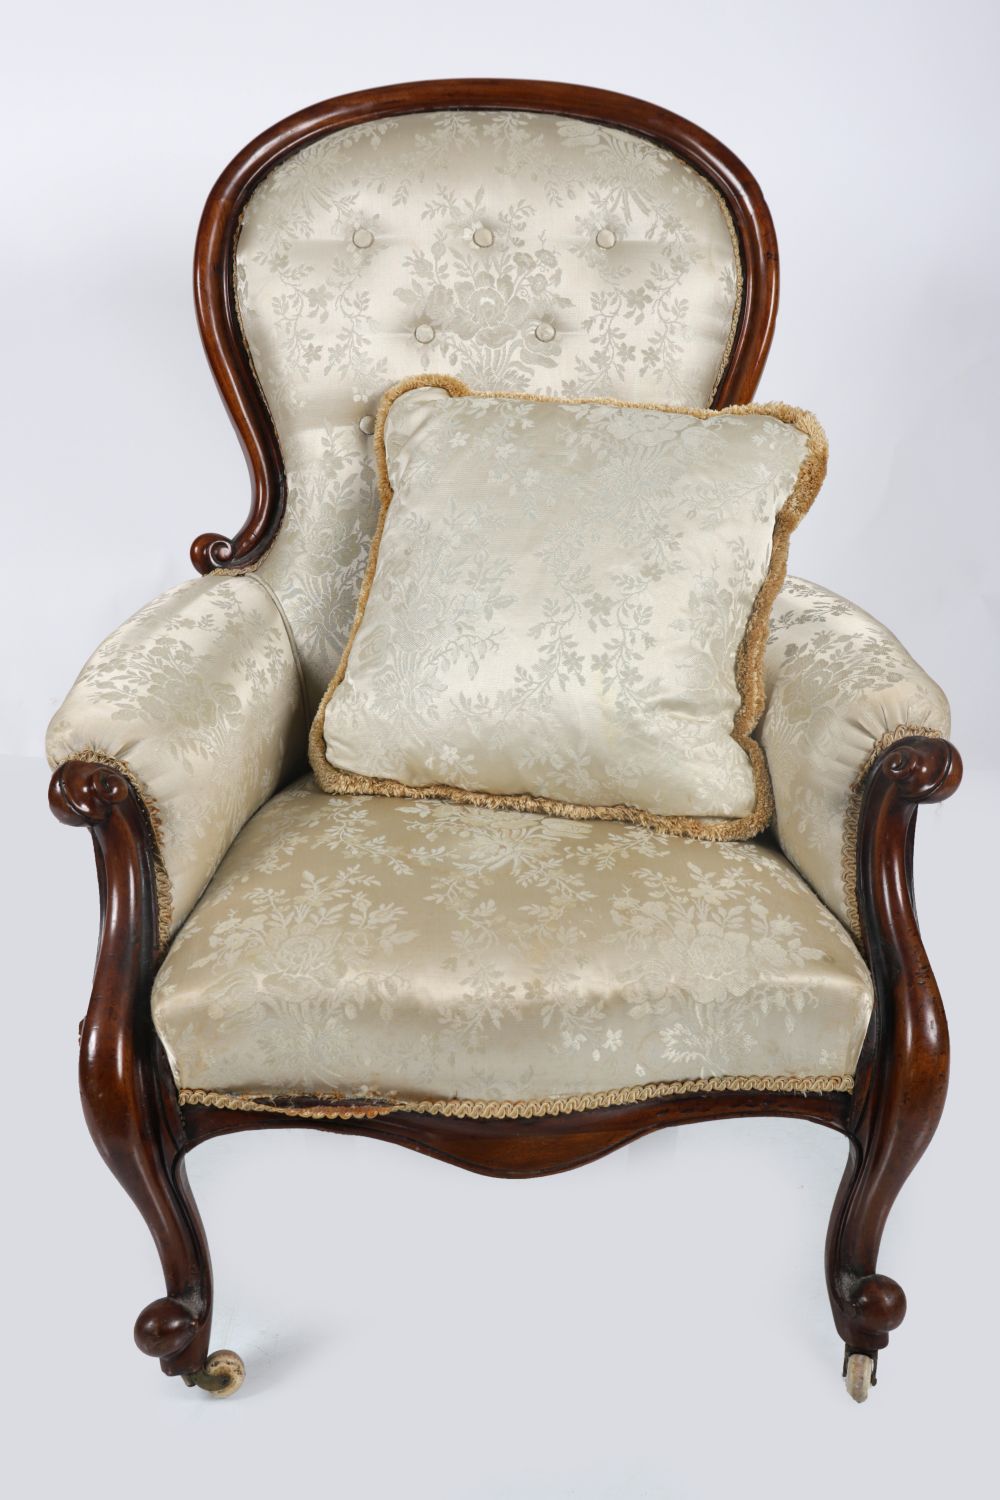 EARLY VICTORIAN MAHOGANY & UPHOLSTERED ARMCHAIR